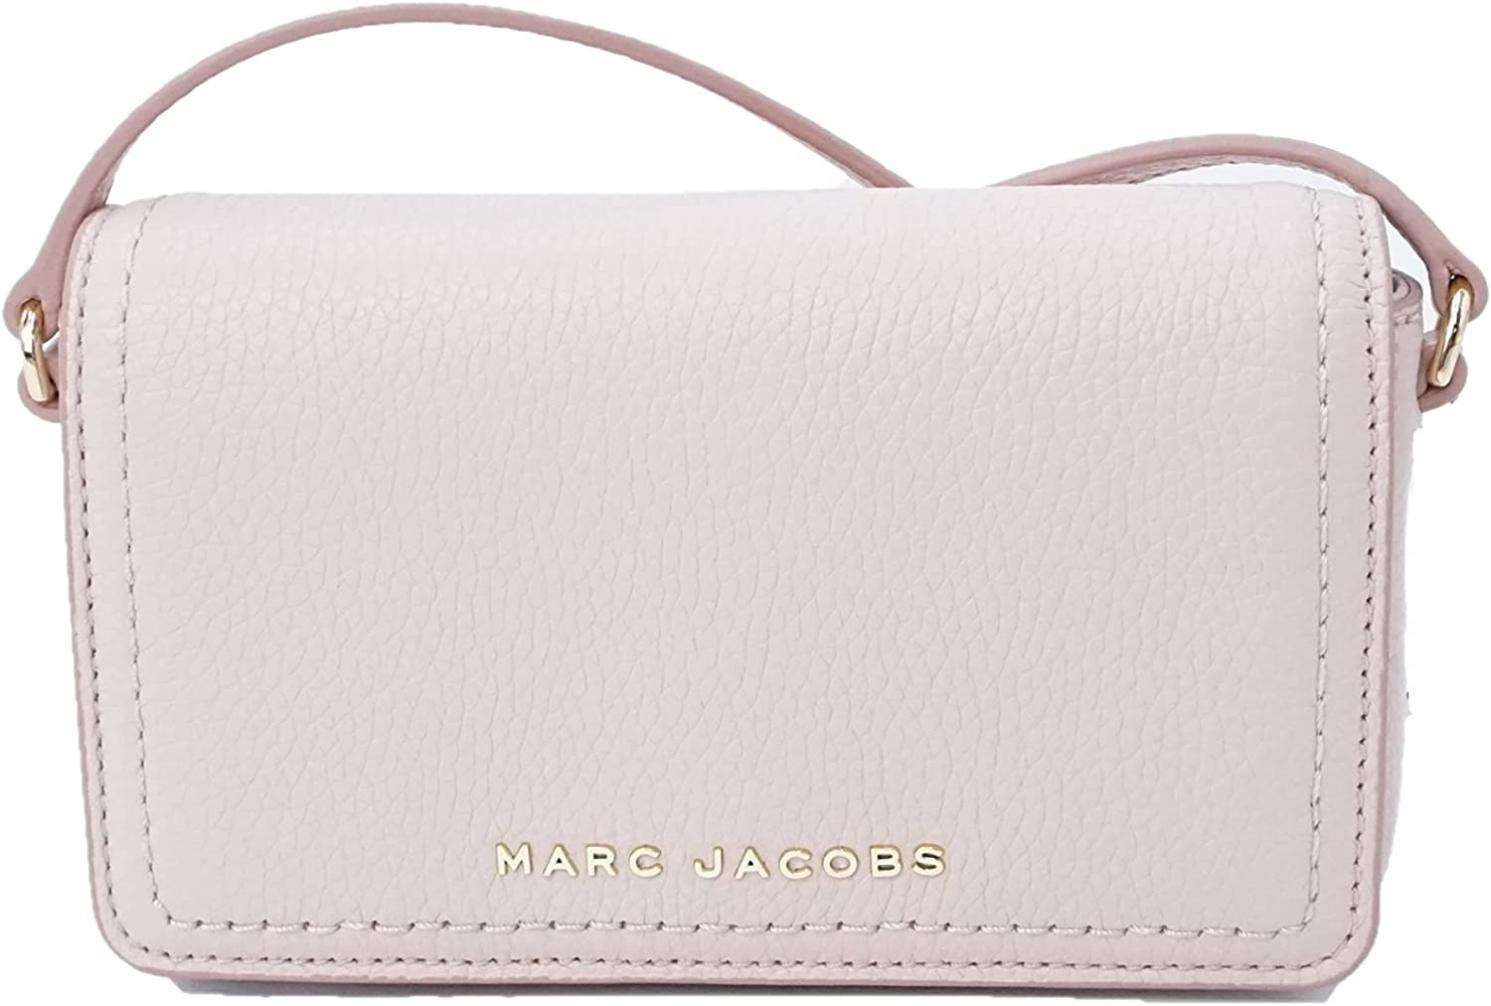 Marc Jacobs H107L0FA21-696 Peach Whip With Gold Hardware Women's Groove Leather Mini Crossbody Bag